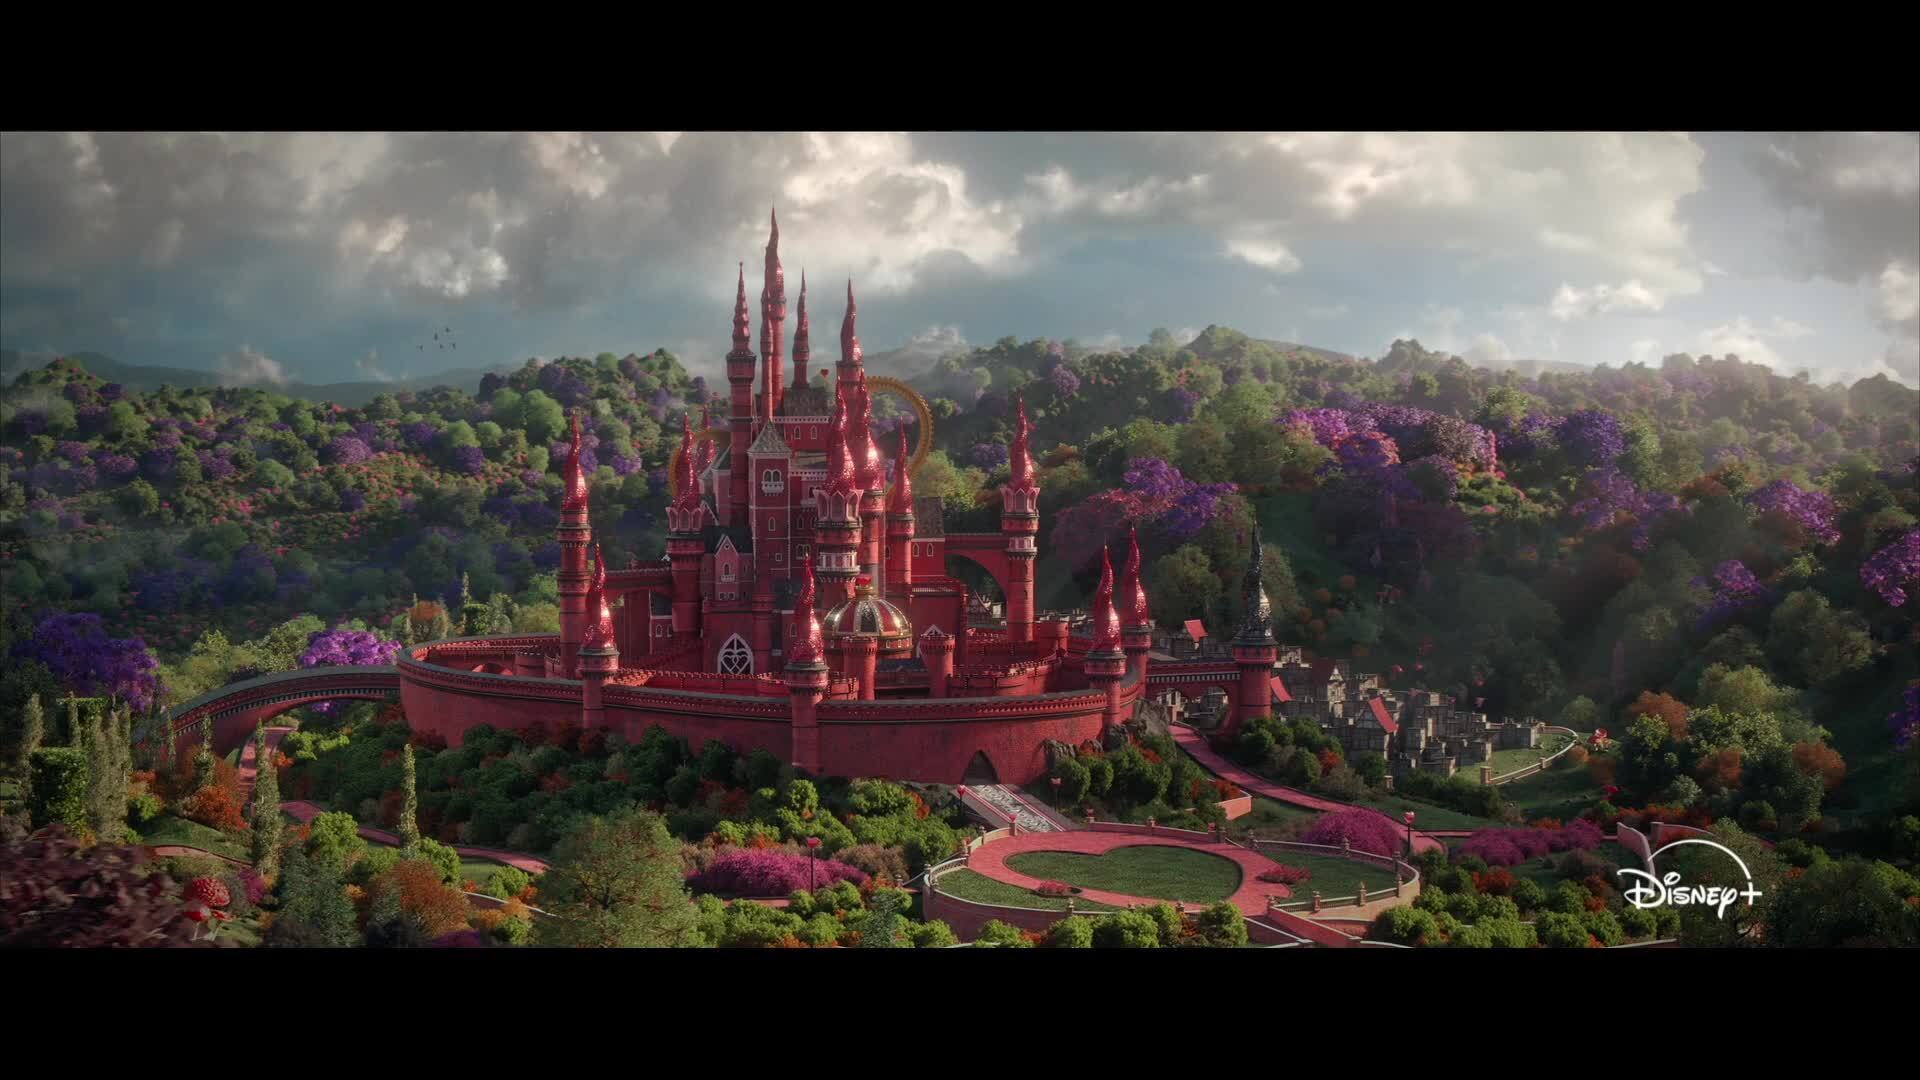 Descendants: The Rise of Red | Official Trailer | Disney+